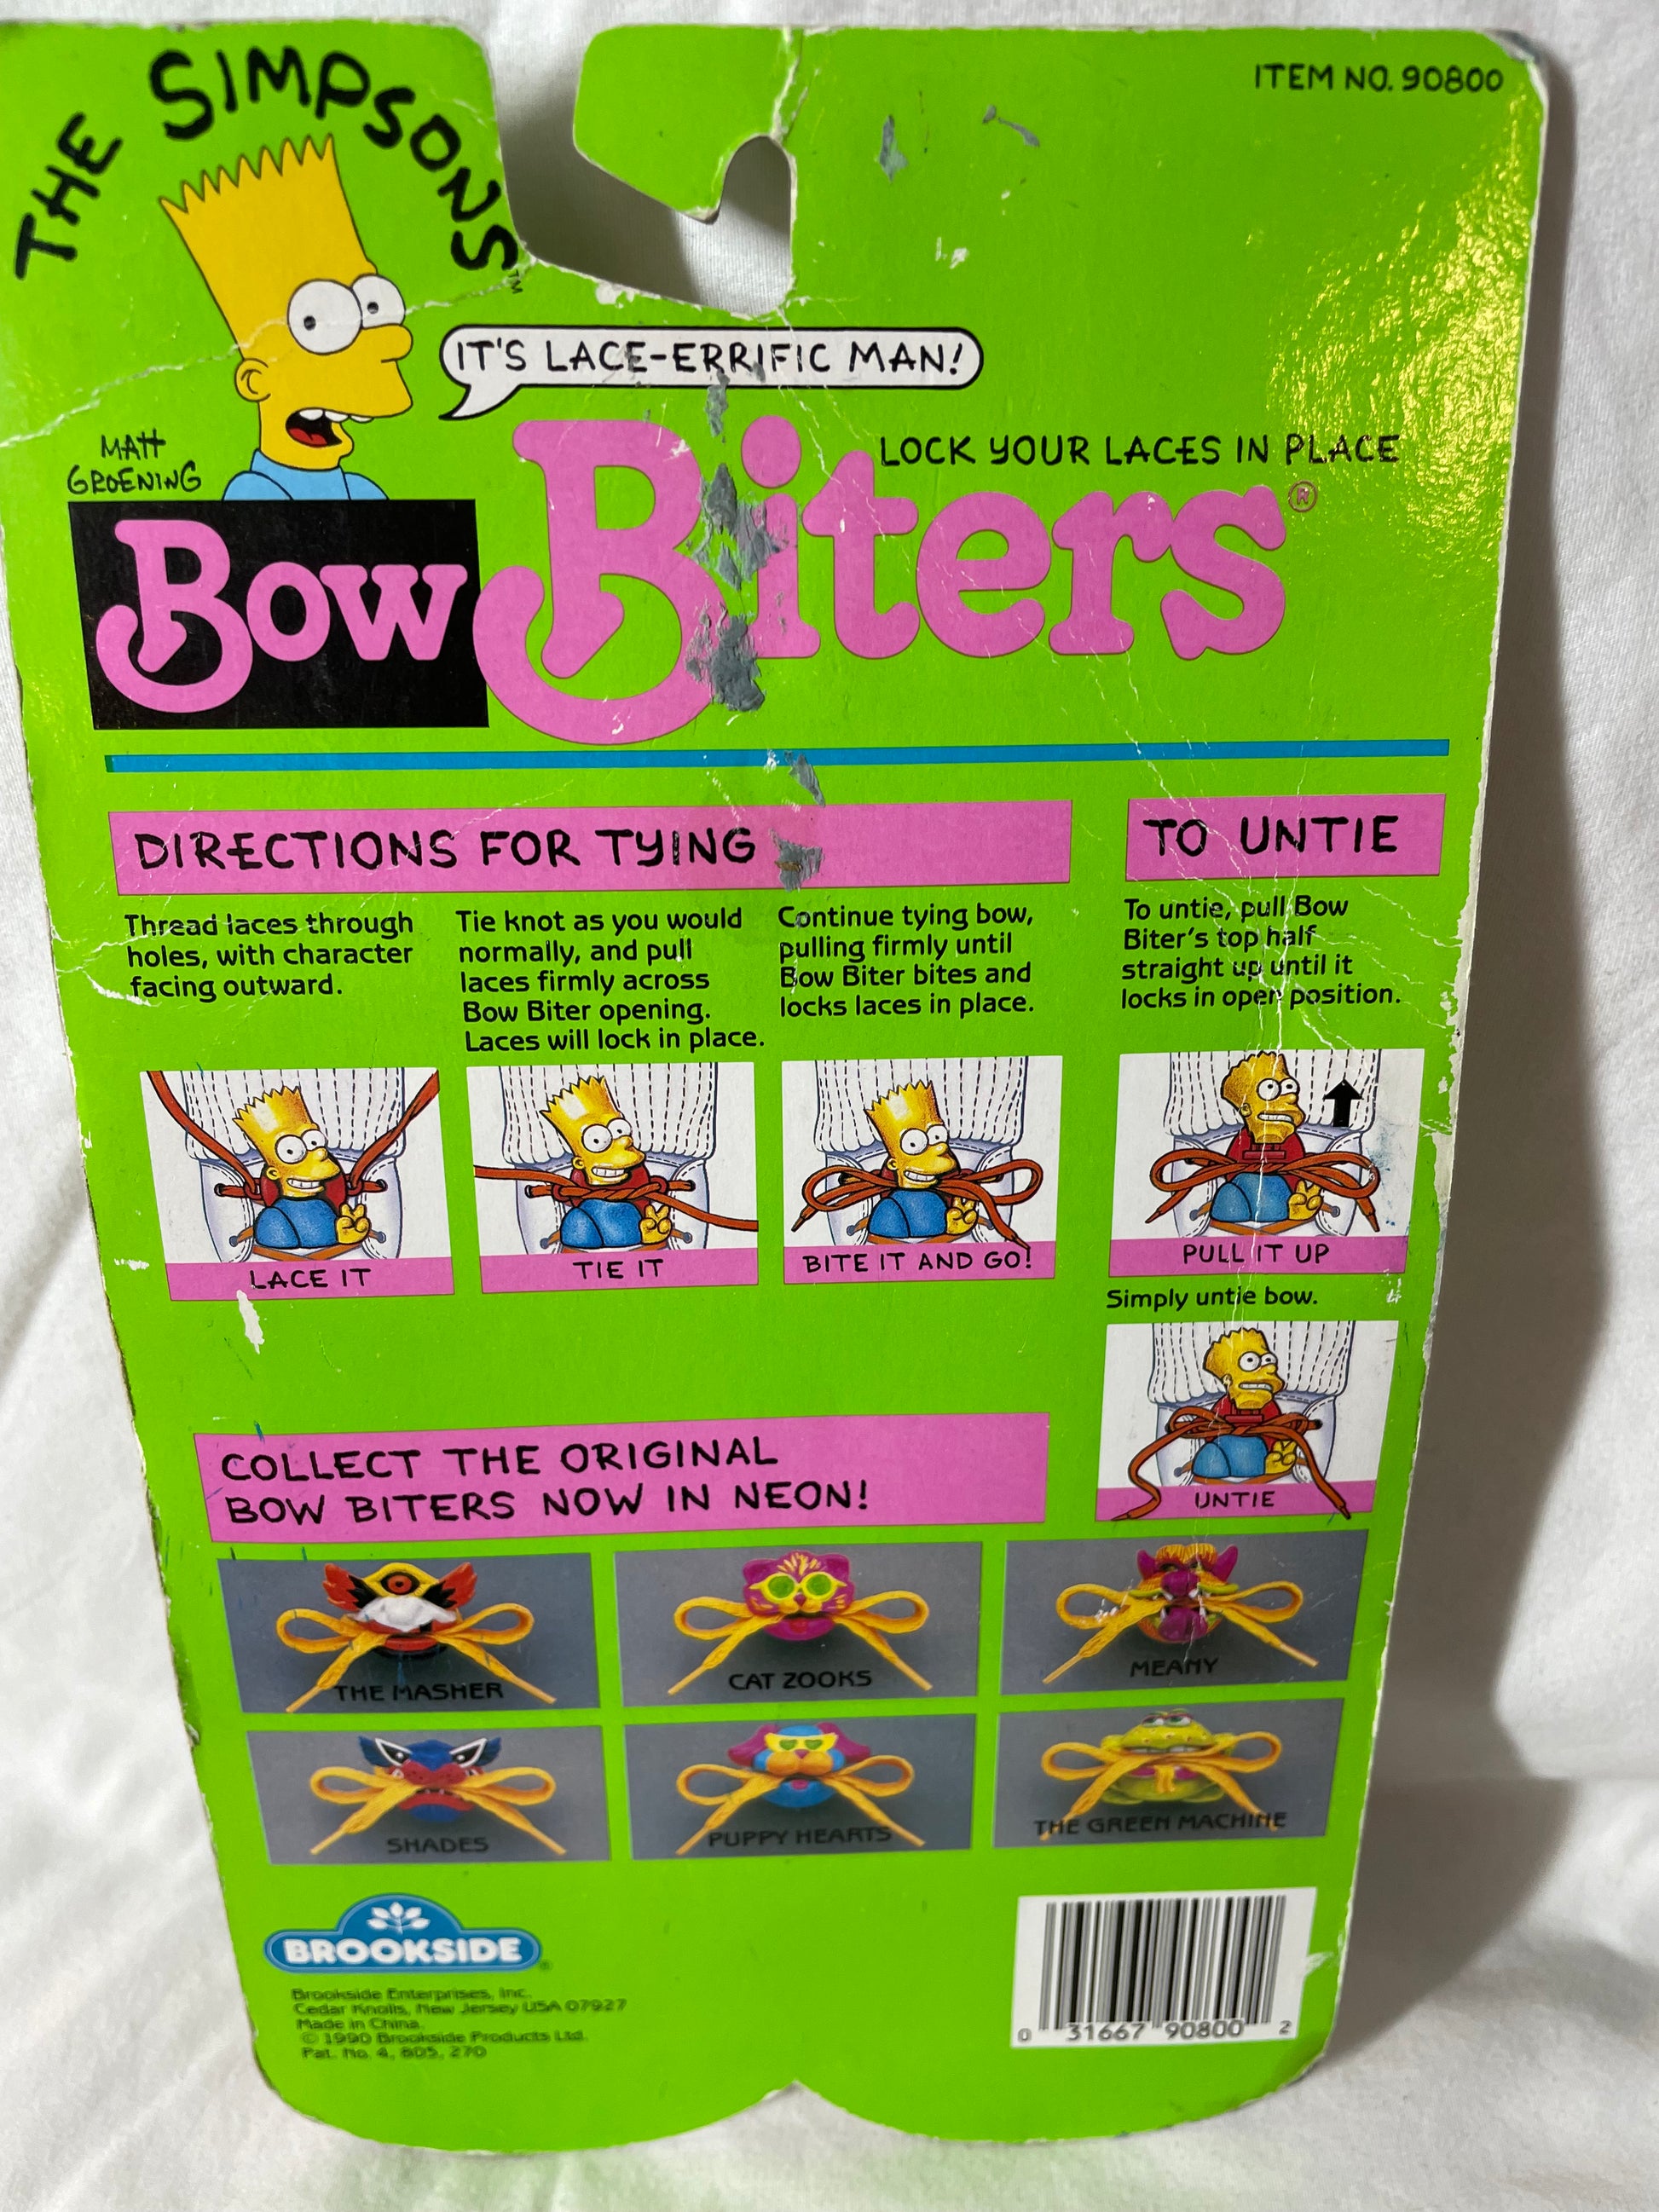 The Simpsons - Bow Biters 1990 #100048 – Bird n' Squirrel